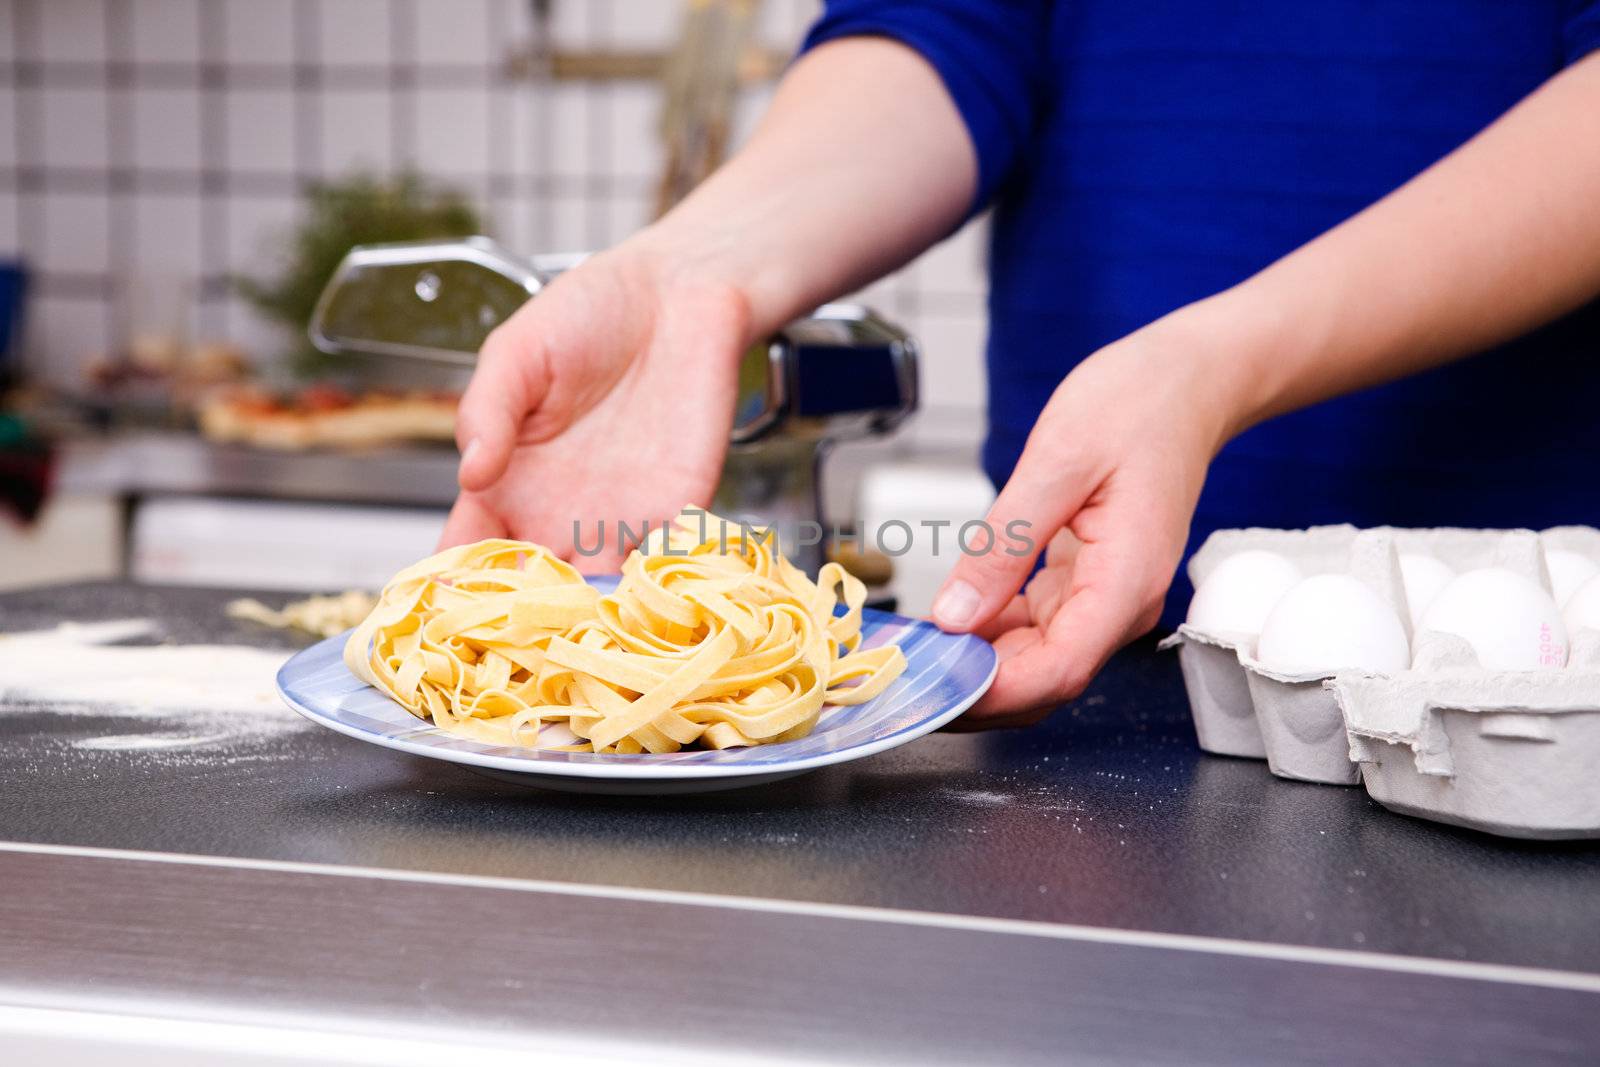 A fresh plate of pasta